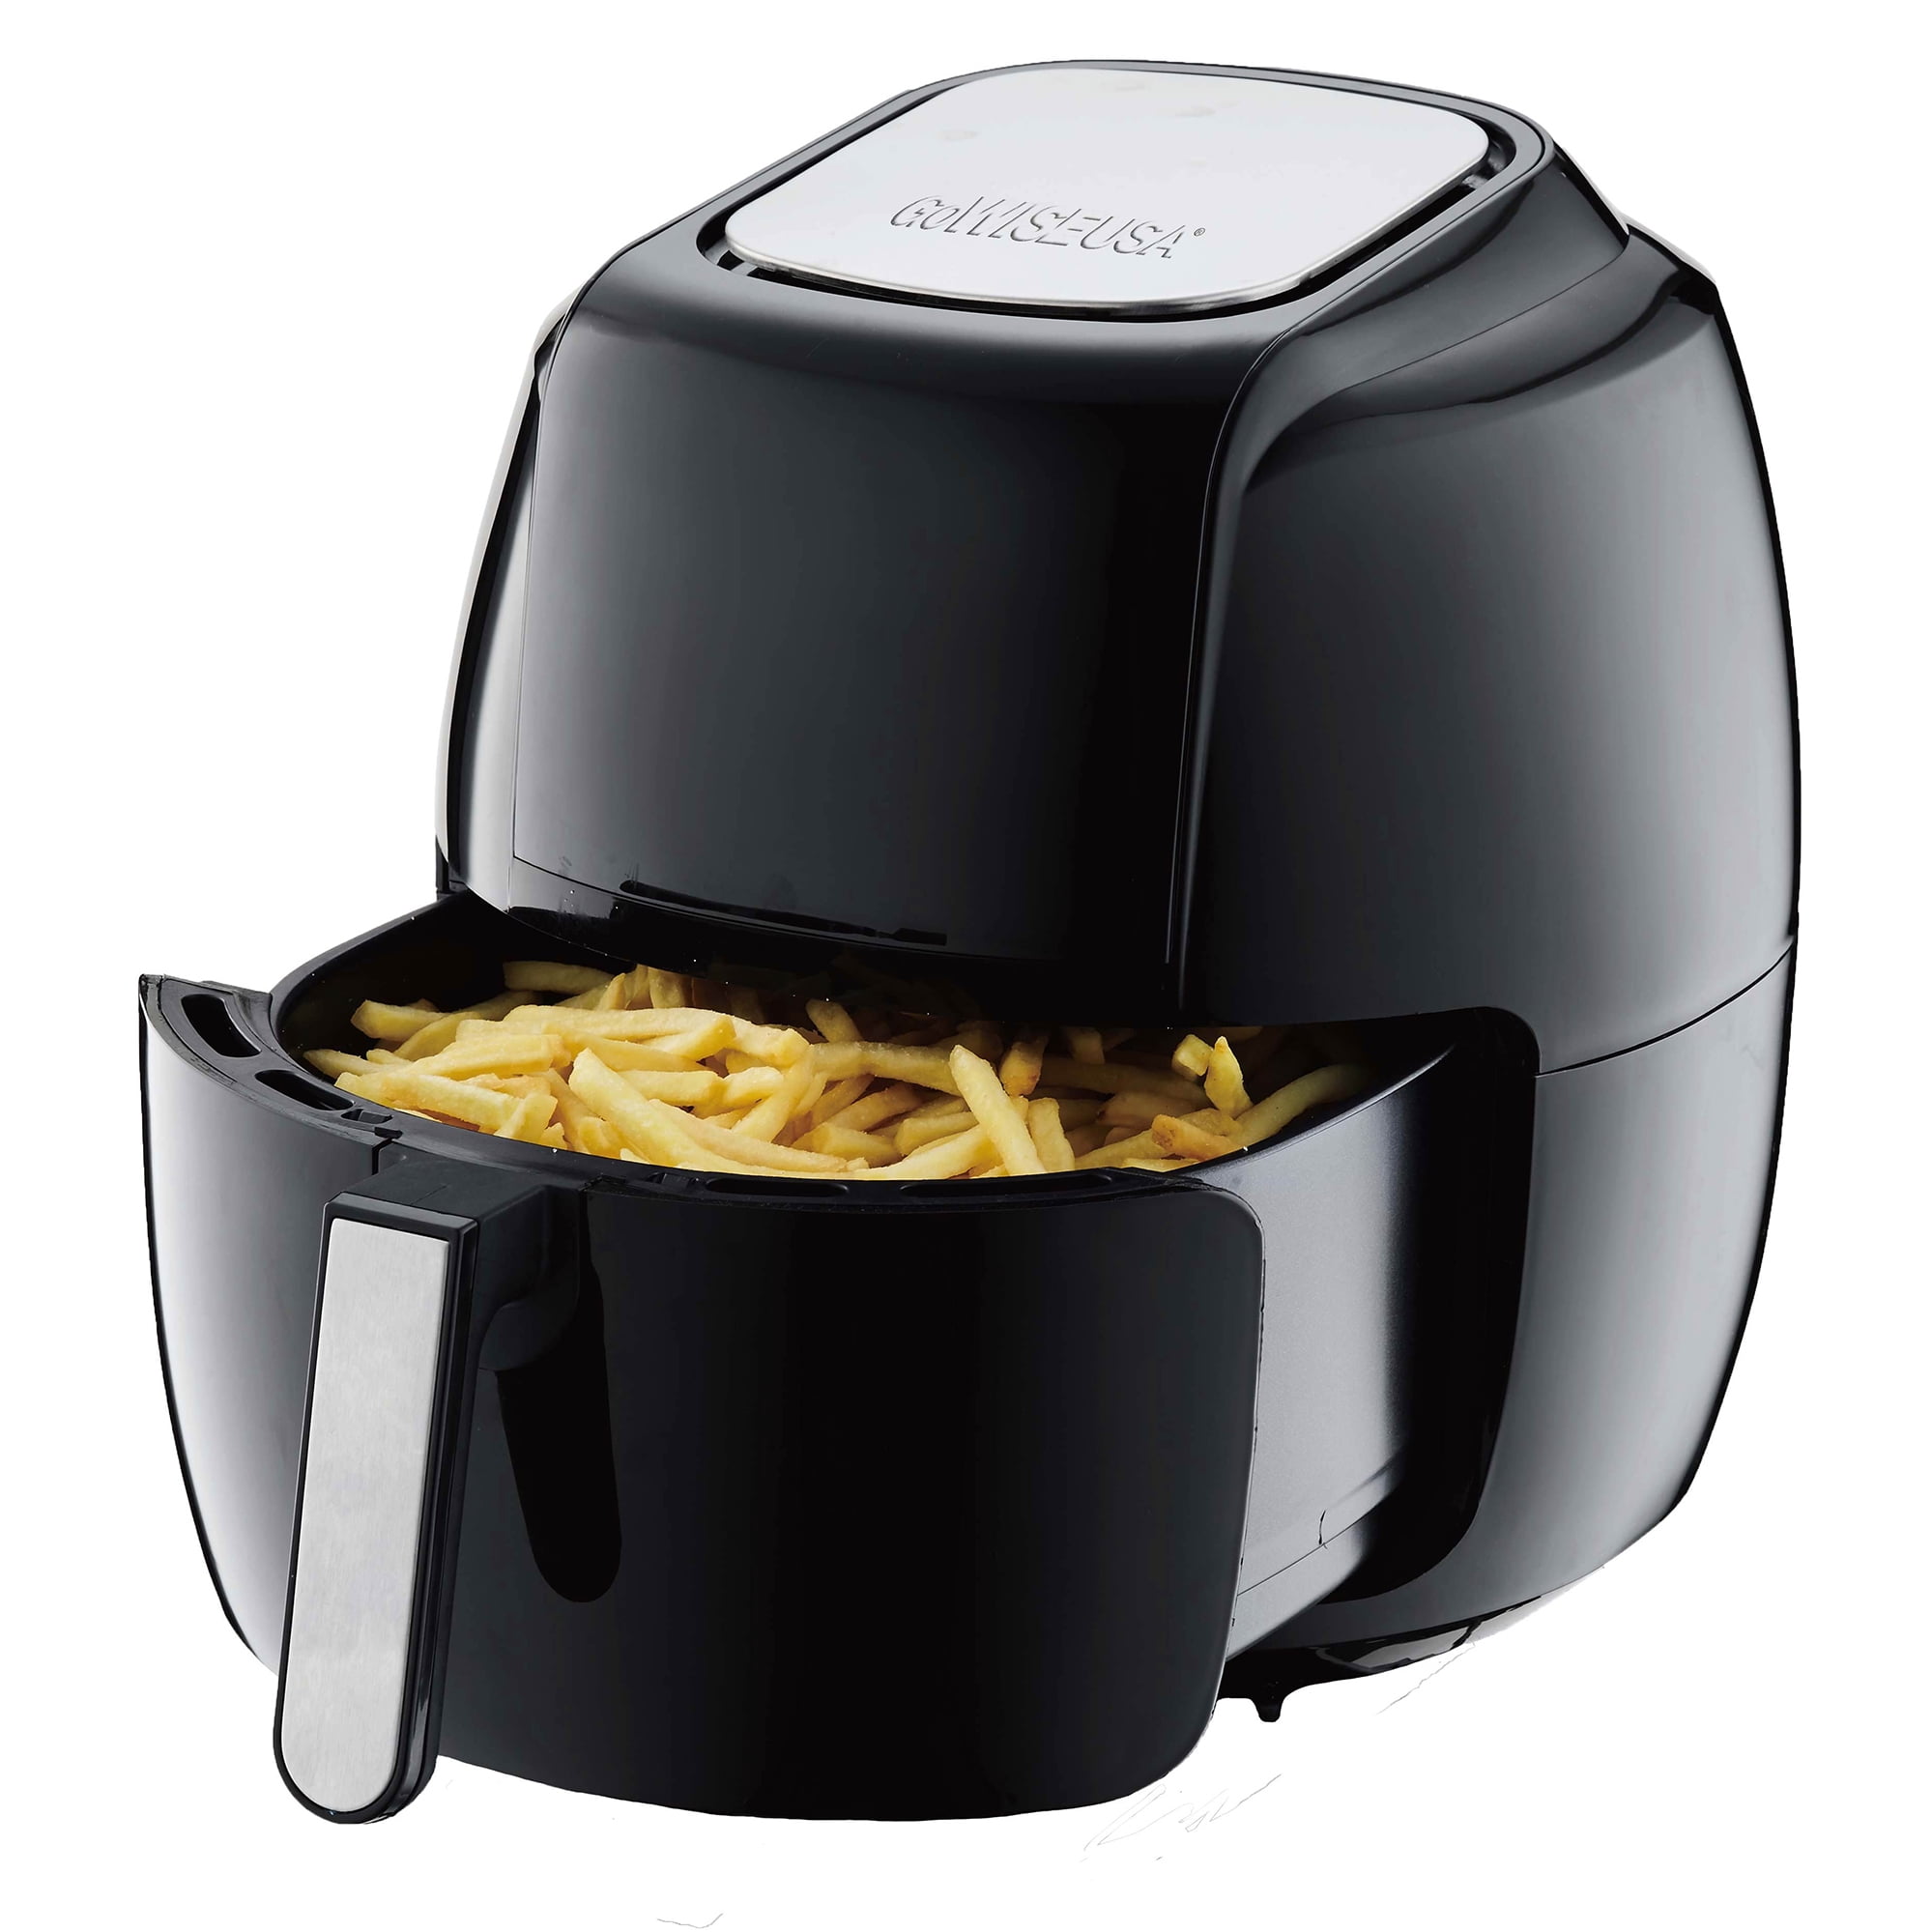 GoWISE USA 3.7-Quart Programmable Air Fryer with 8 Cook Presets, GW22638 -  Black & Standard 6-Piece Air Fryer Accessory Kit for 2.75-4 Quarts, Small